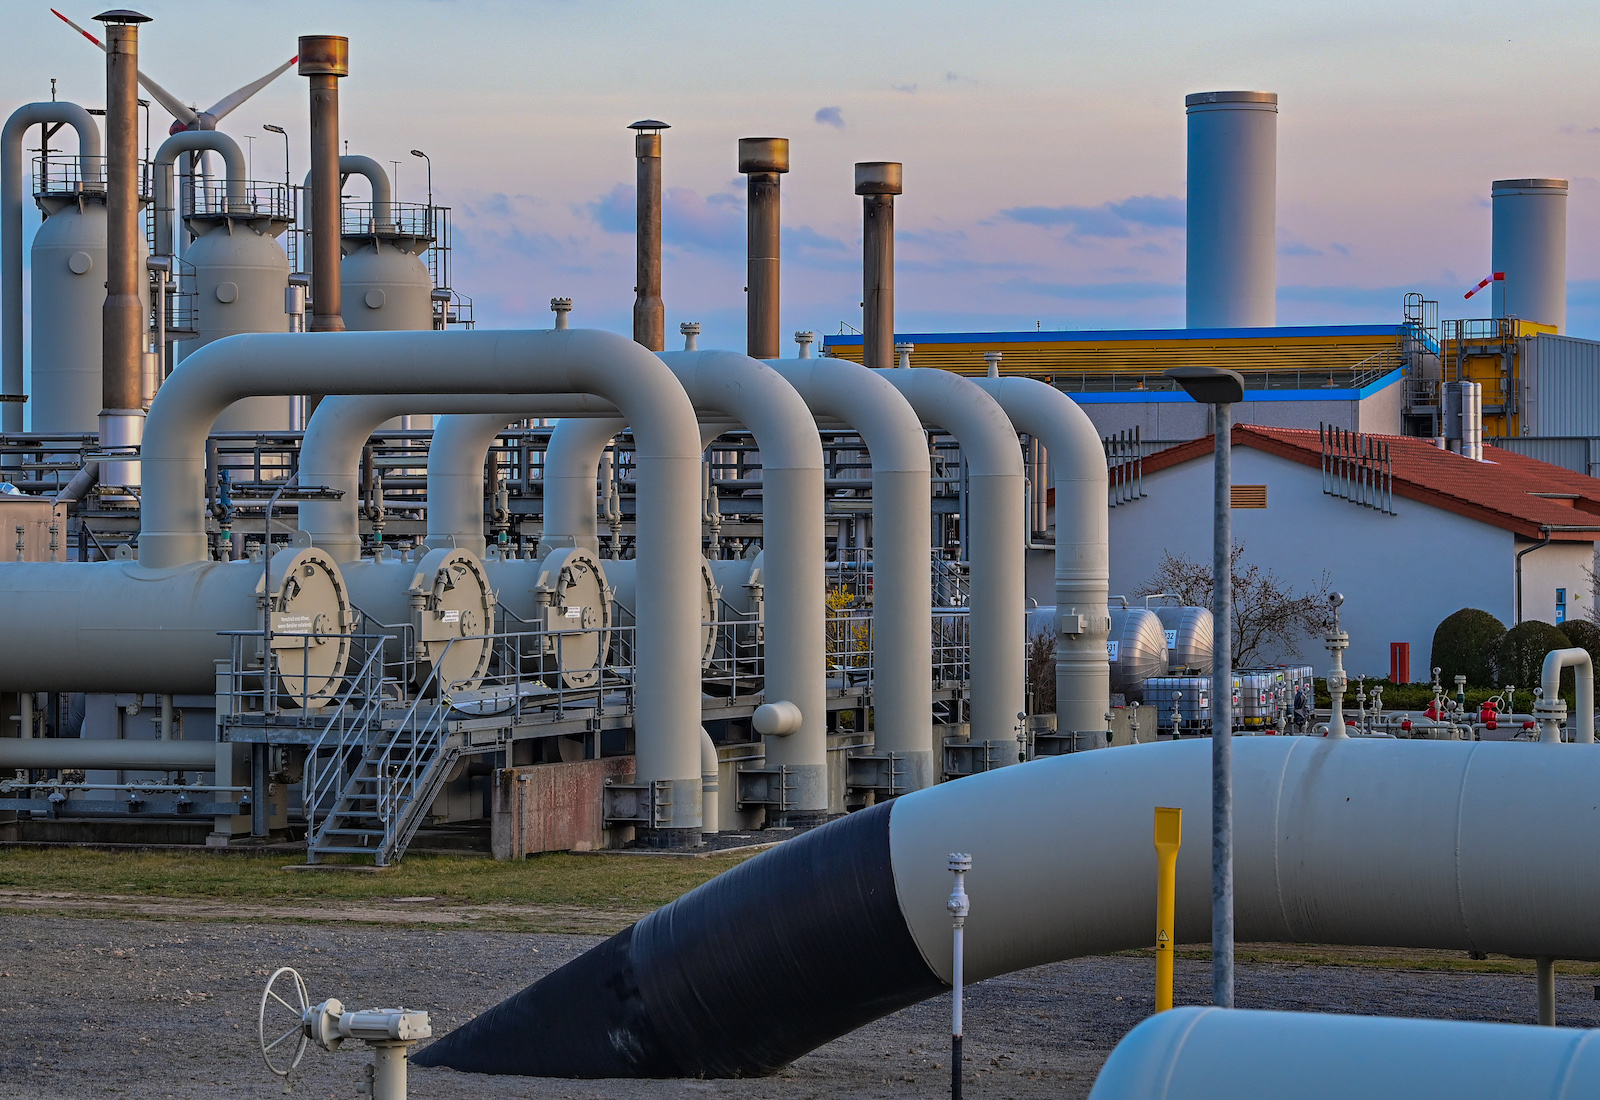 A series of pipes shows a natural gas compressor station